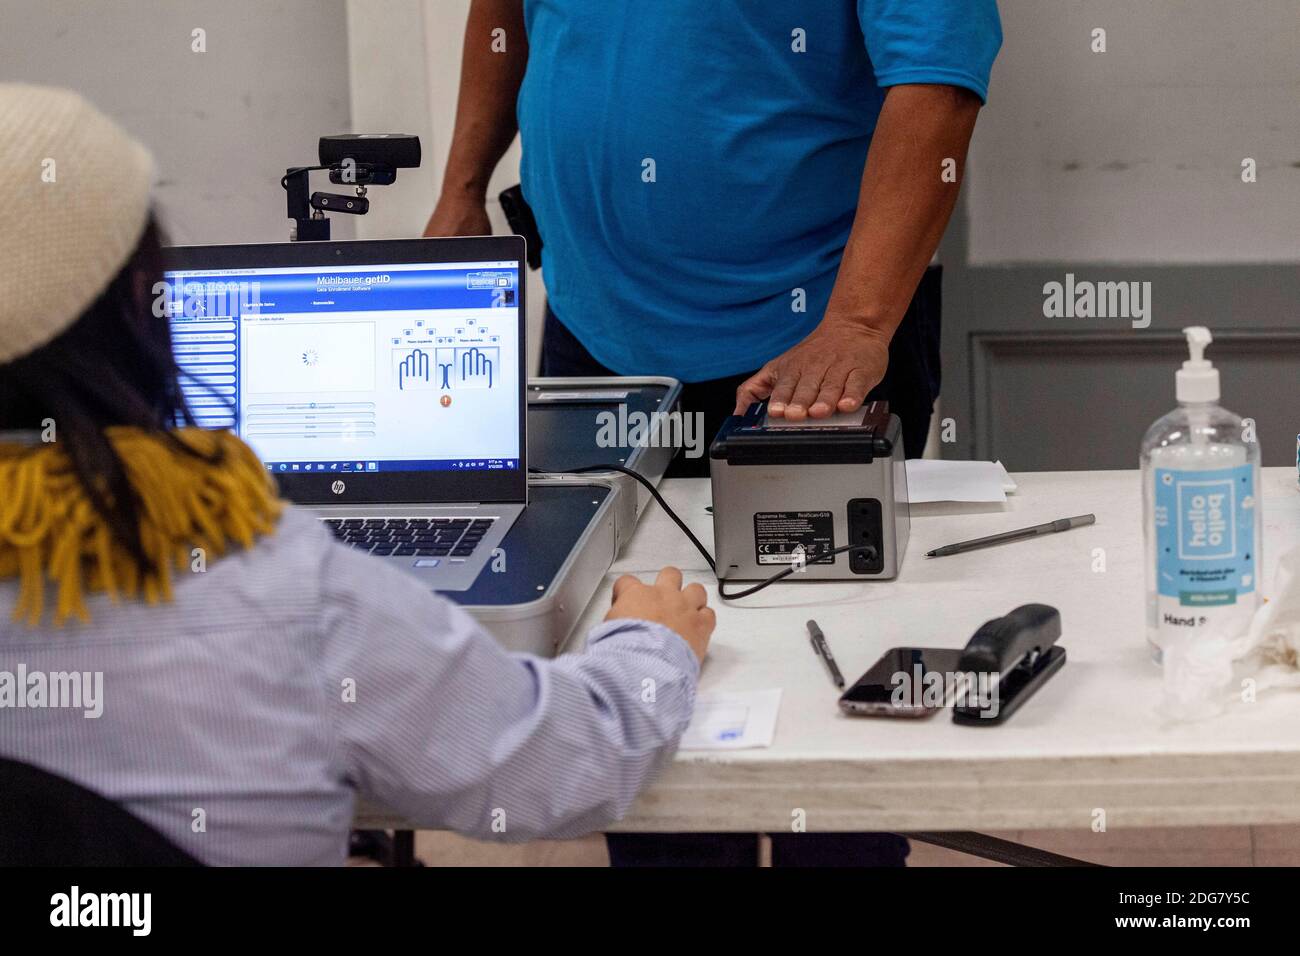 El Salvadoran immigrant gets his fingerprints scanned for his Documento Unico de Identidad (DUI), the national identification card of El Salvador.The El Salvadoran Consulate is responsible for processing identification materials for immigrants from El Salvador who live in 11 different states including North and South Dakota, Minnesota, Wisconsin, Illinois, Indiana, Michigan, Ohio, Iowa, Missouri and Kentucky. It is difficult for immigrants who do not live in Illinois to travel to Chicago, so the El Salvadoran consulate does a pop up in each state every one to two years to help get El Salvadora Stock Photo